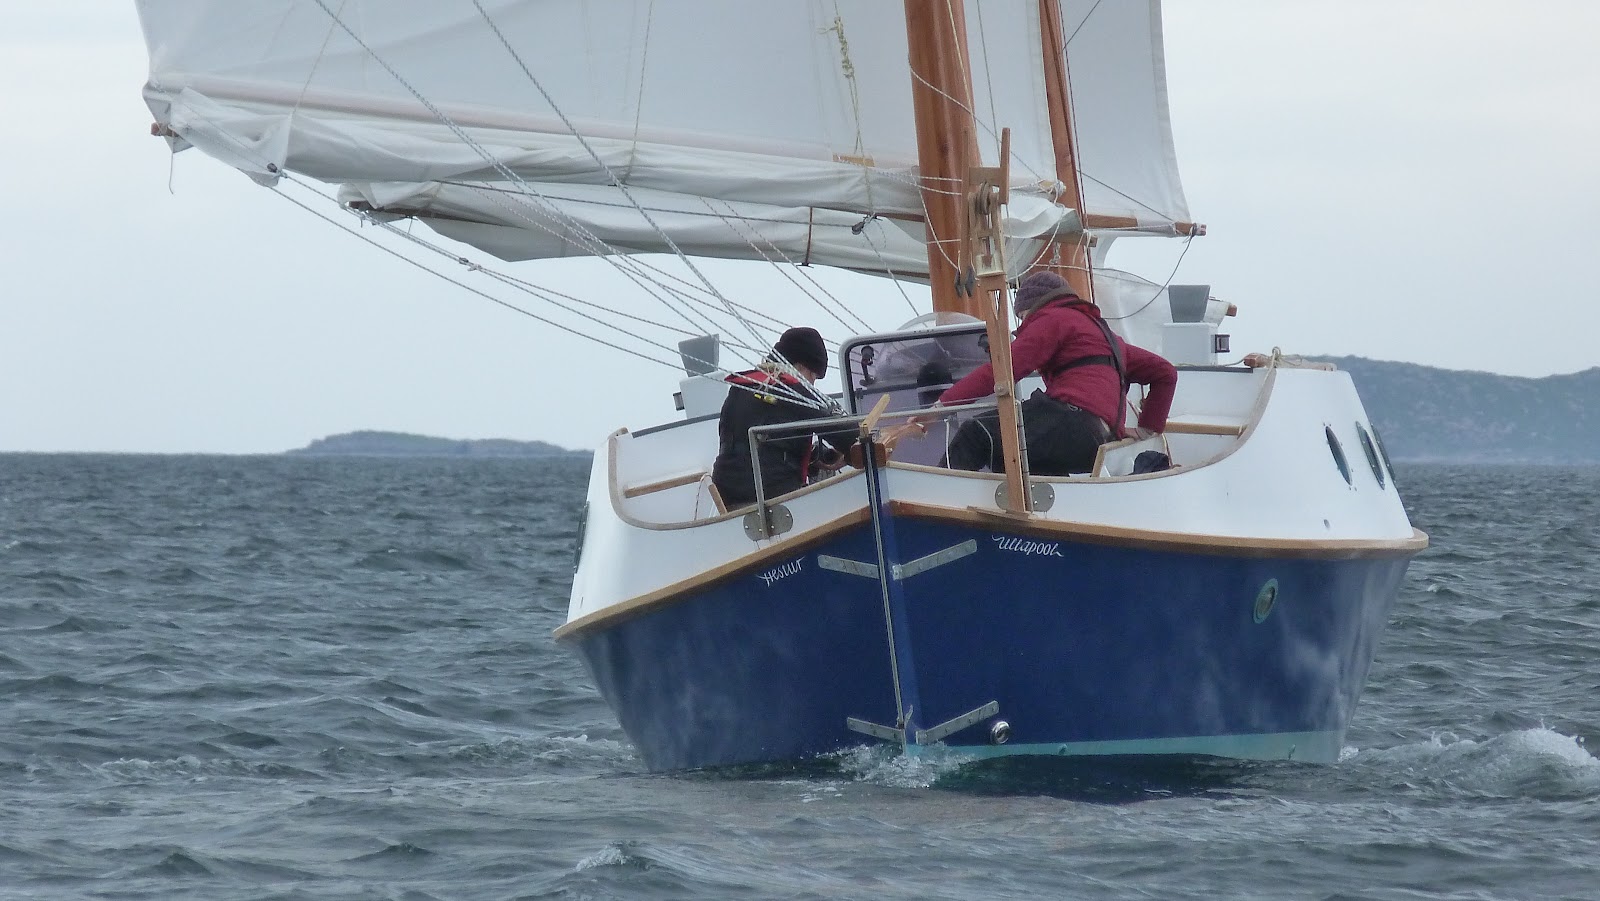 Building a 34' junk schooner: Out Sailing and Self steering